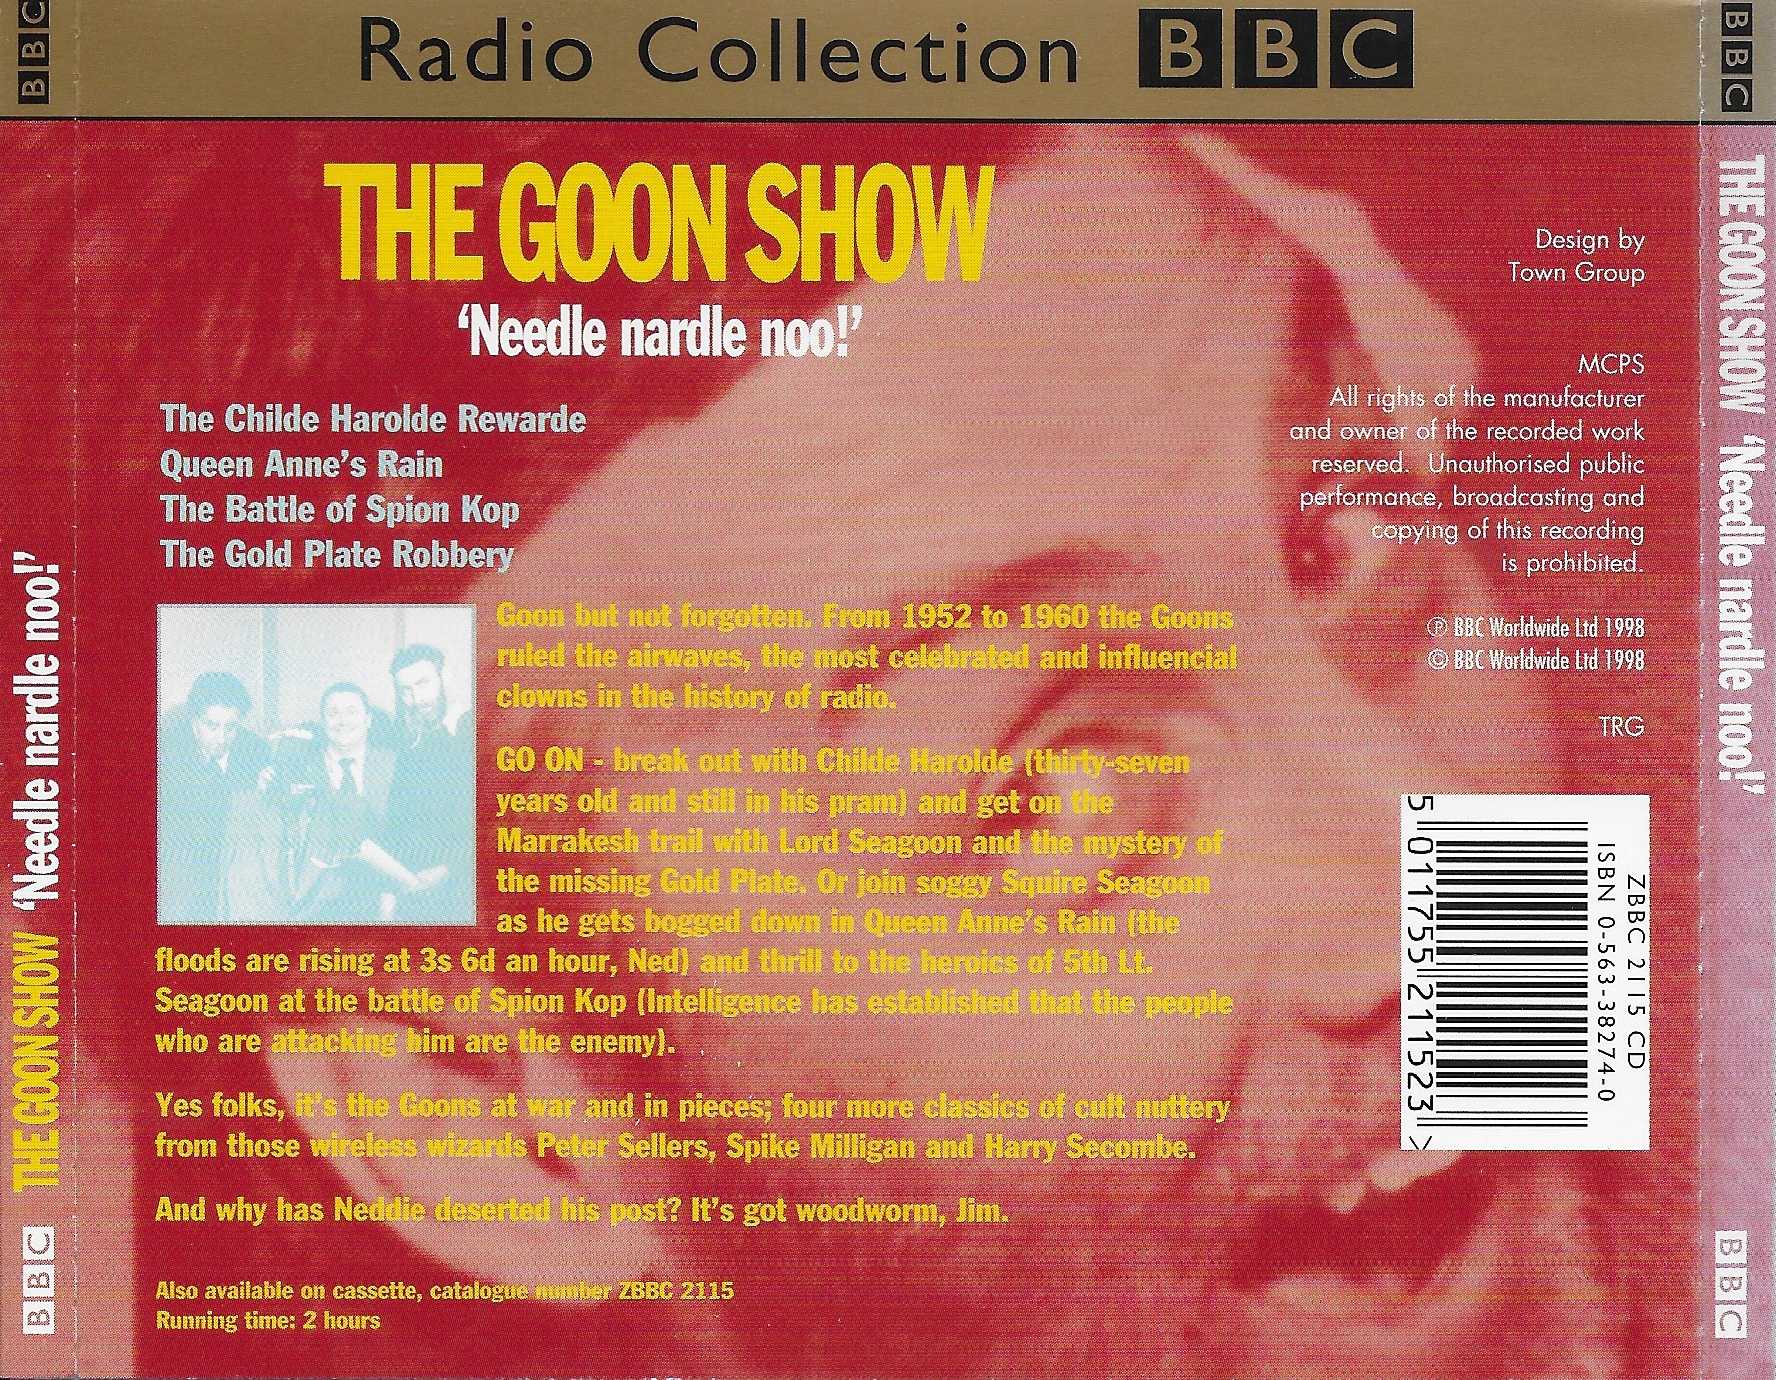 Picture of ZBBC 2115 CD The Goon show 14 - Needle nardle noo! by artist Spike Milligan from the BBC records and Tapes library